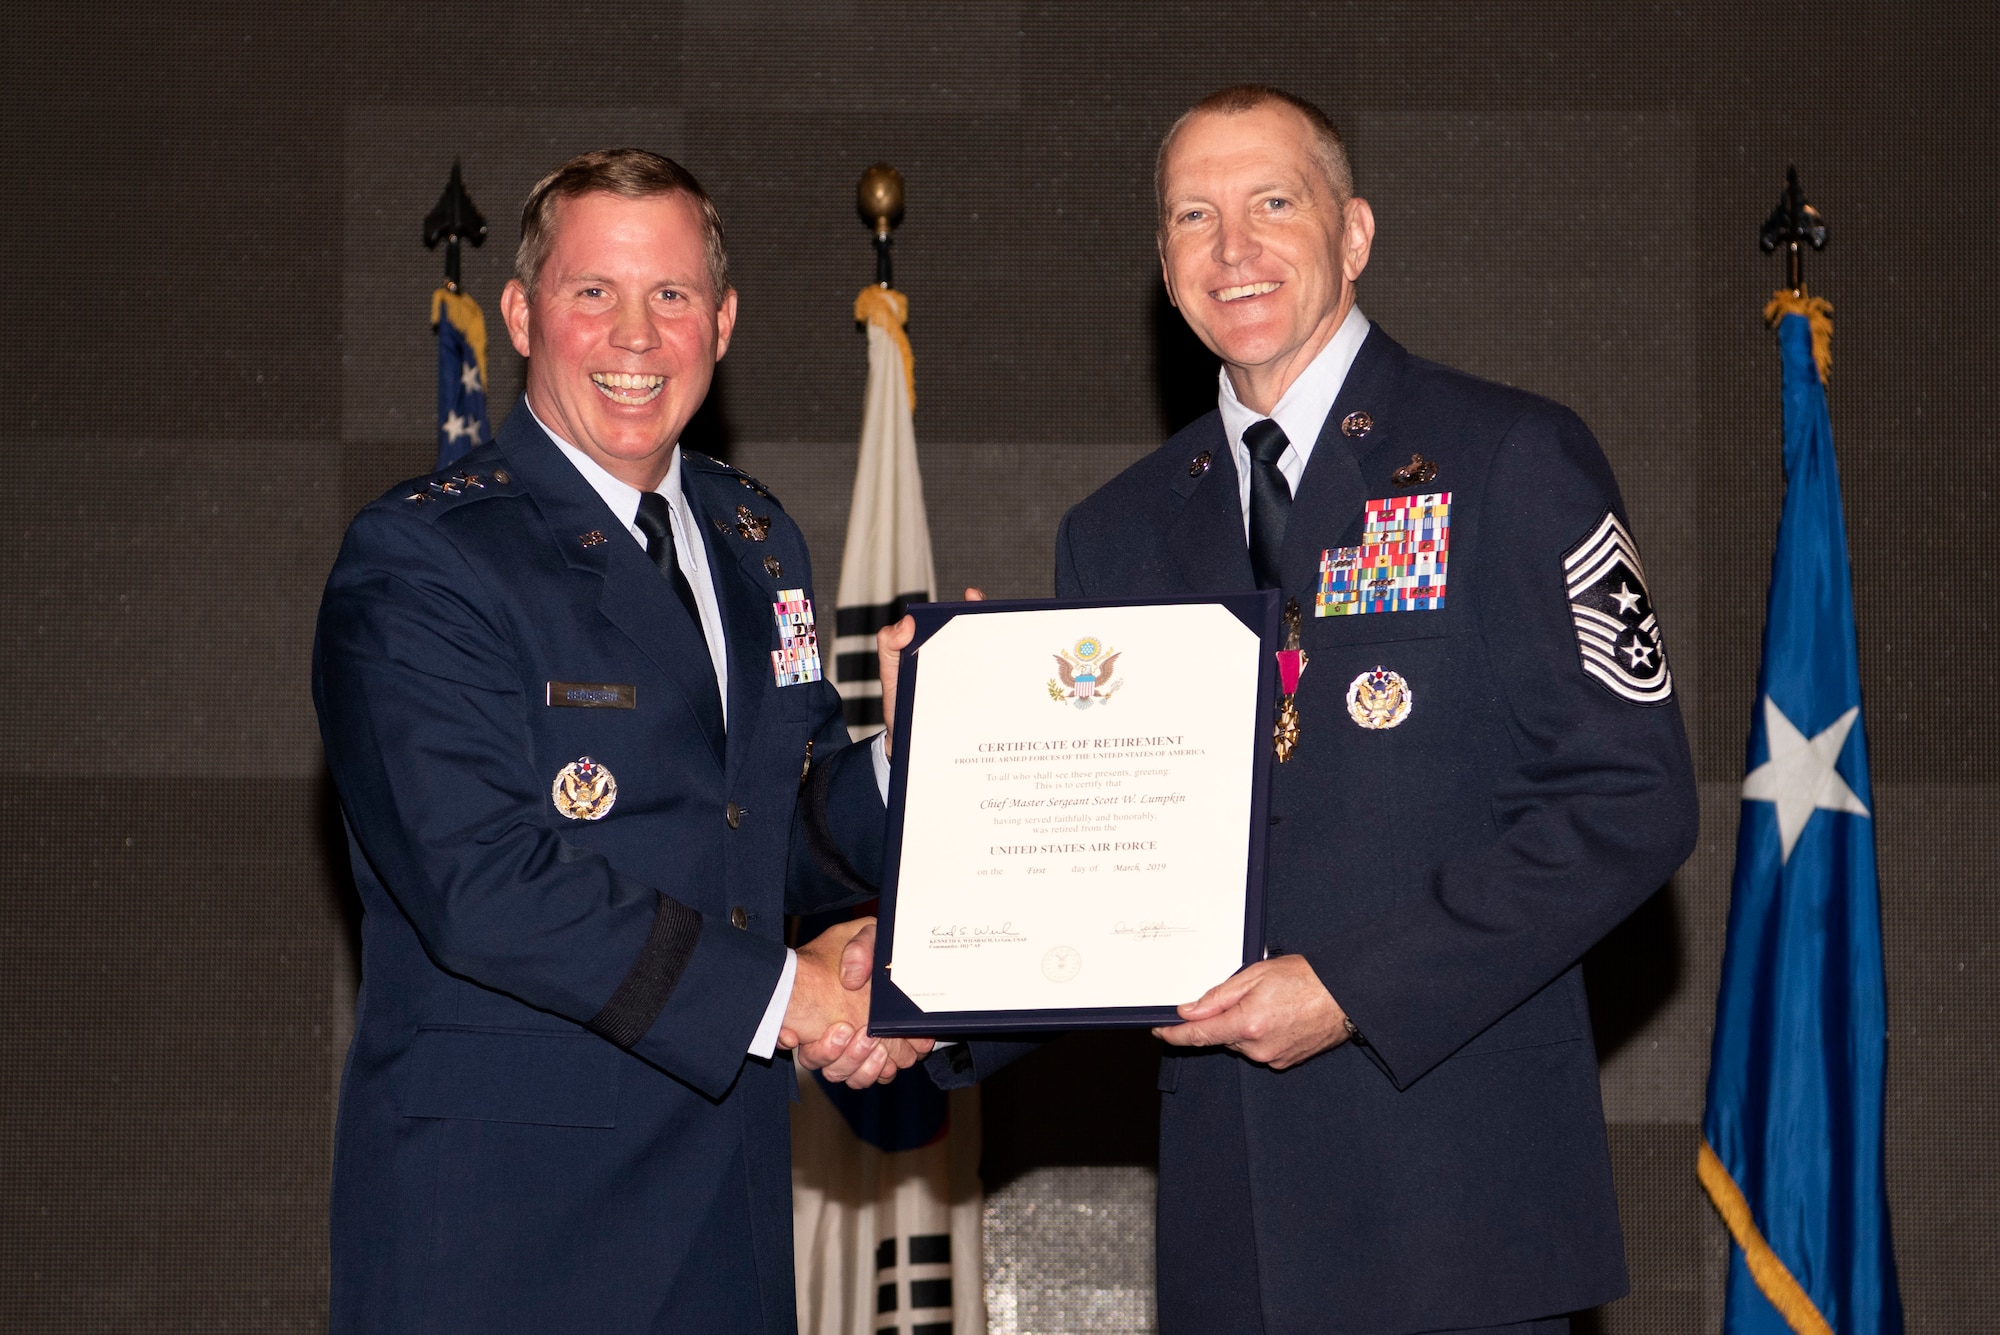 Lt. Gen. Thomas Bergeson, U.S. Central Command deputy commander and former Seventh Air Force commander, poses with Chief Master Sgt. Scott Lumpkin, Seventh Air Force command chief, during his retirment ceremony Nov. 16, 2018 at Osan Air Base, Republic of Korea. During his 30 years in the Air Force, Lumpkin served at 17 different locations which included four assignments to Osan. (U.S. Air Force photo by Senior Airman Kelsey Tucker)